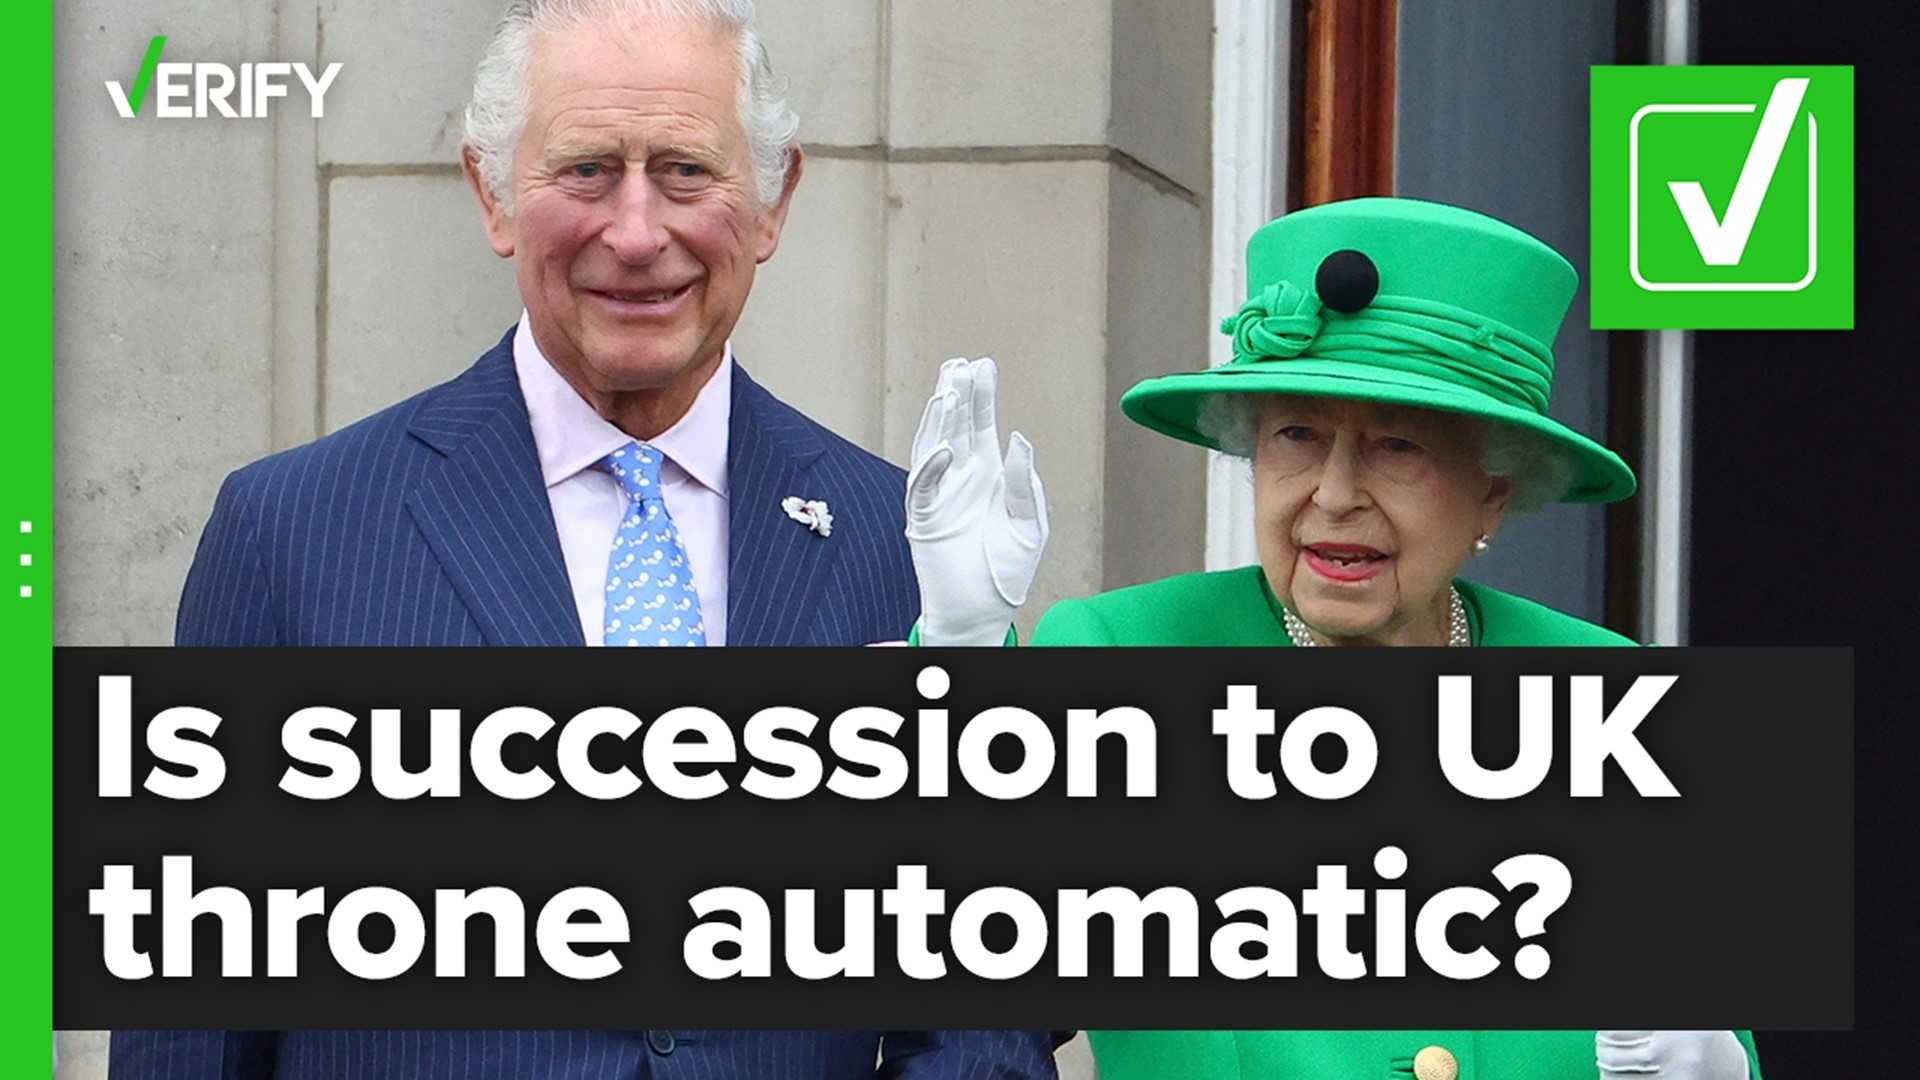 Though a formal ceremony hasn’t yet taken place, King Charles III automatically became the UK's newest monarch the moment his mother passed away. Here’s why.